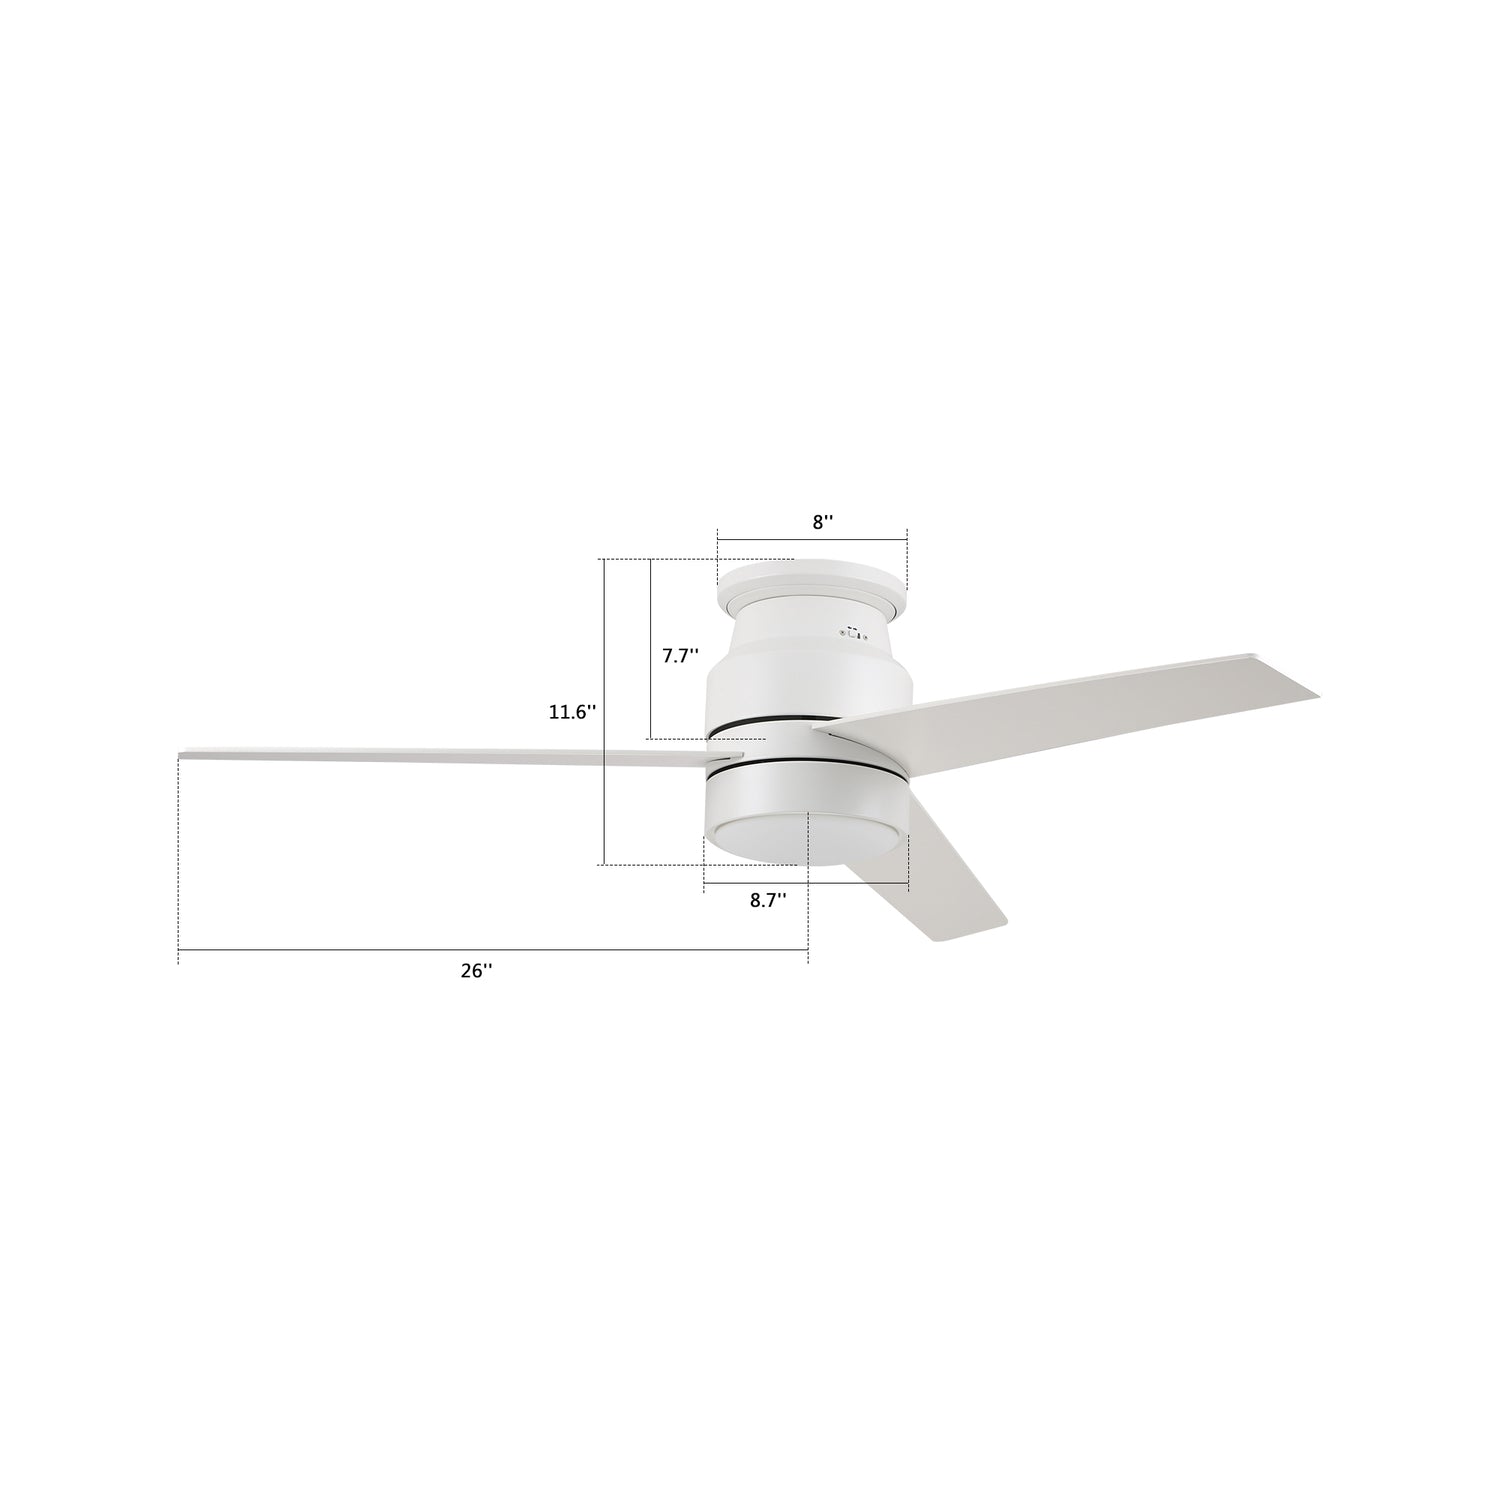 Smafan Ranger Smart Ceiling Fan blends elegantly into its surroundings while providing a cooling effect and strong airflow that large indoor living spaces need. Ranger’s energy-efficient LED light kit has 3000 lumens and lasts over 50000+ hours and its warm soft white light creates an inviting space. Ranger’s energy-efficient and completely silent motor provides a comfortable environment for any indoor spaces. 